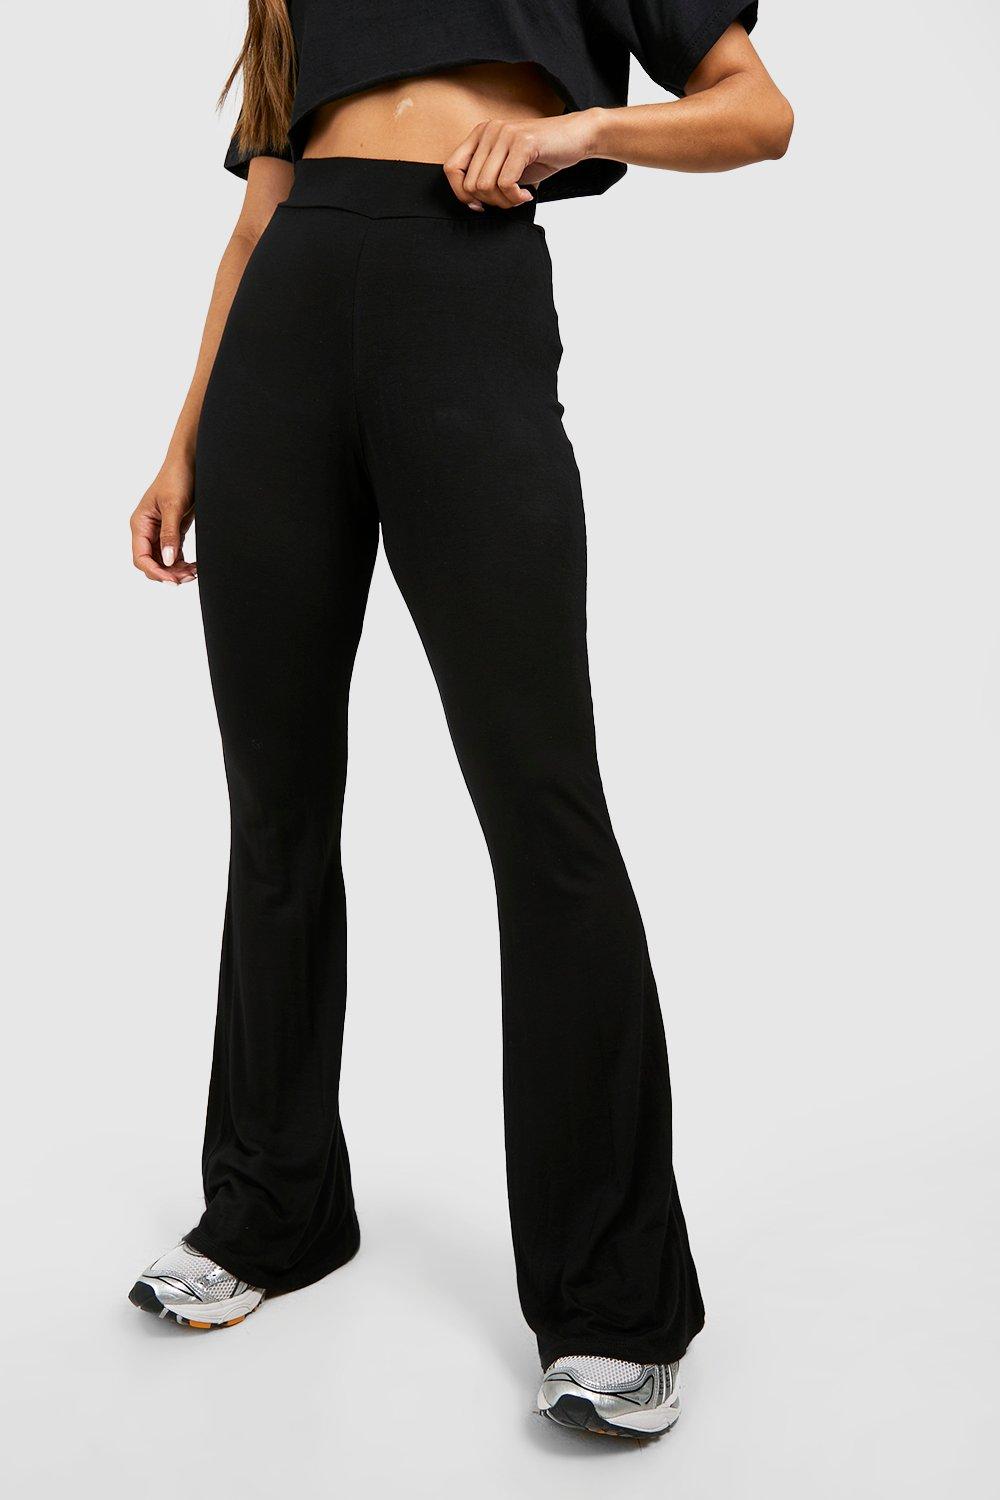 fit and flare pants